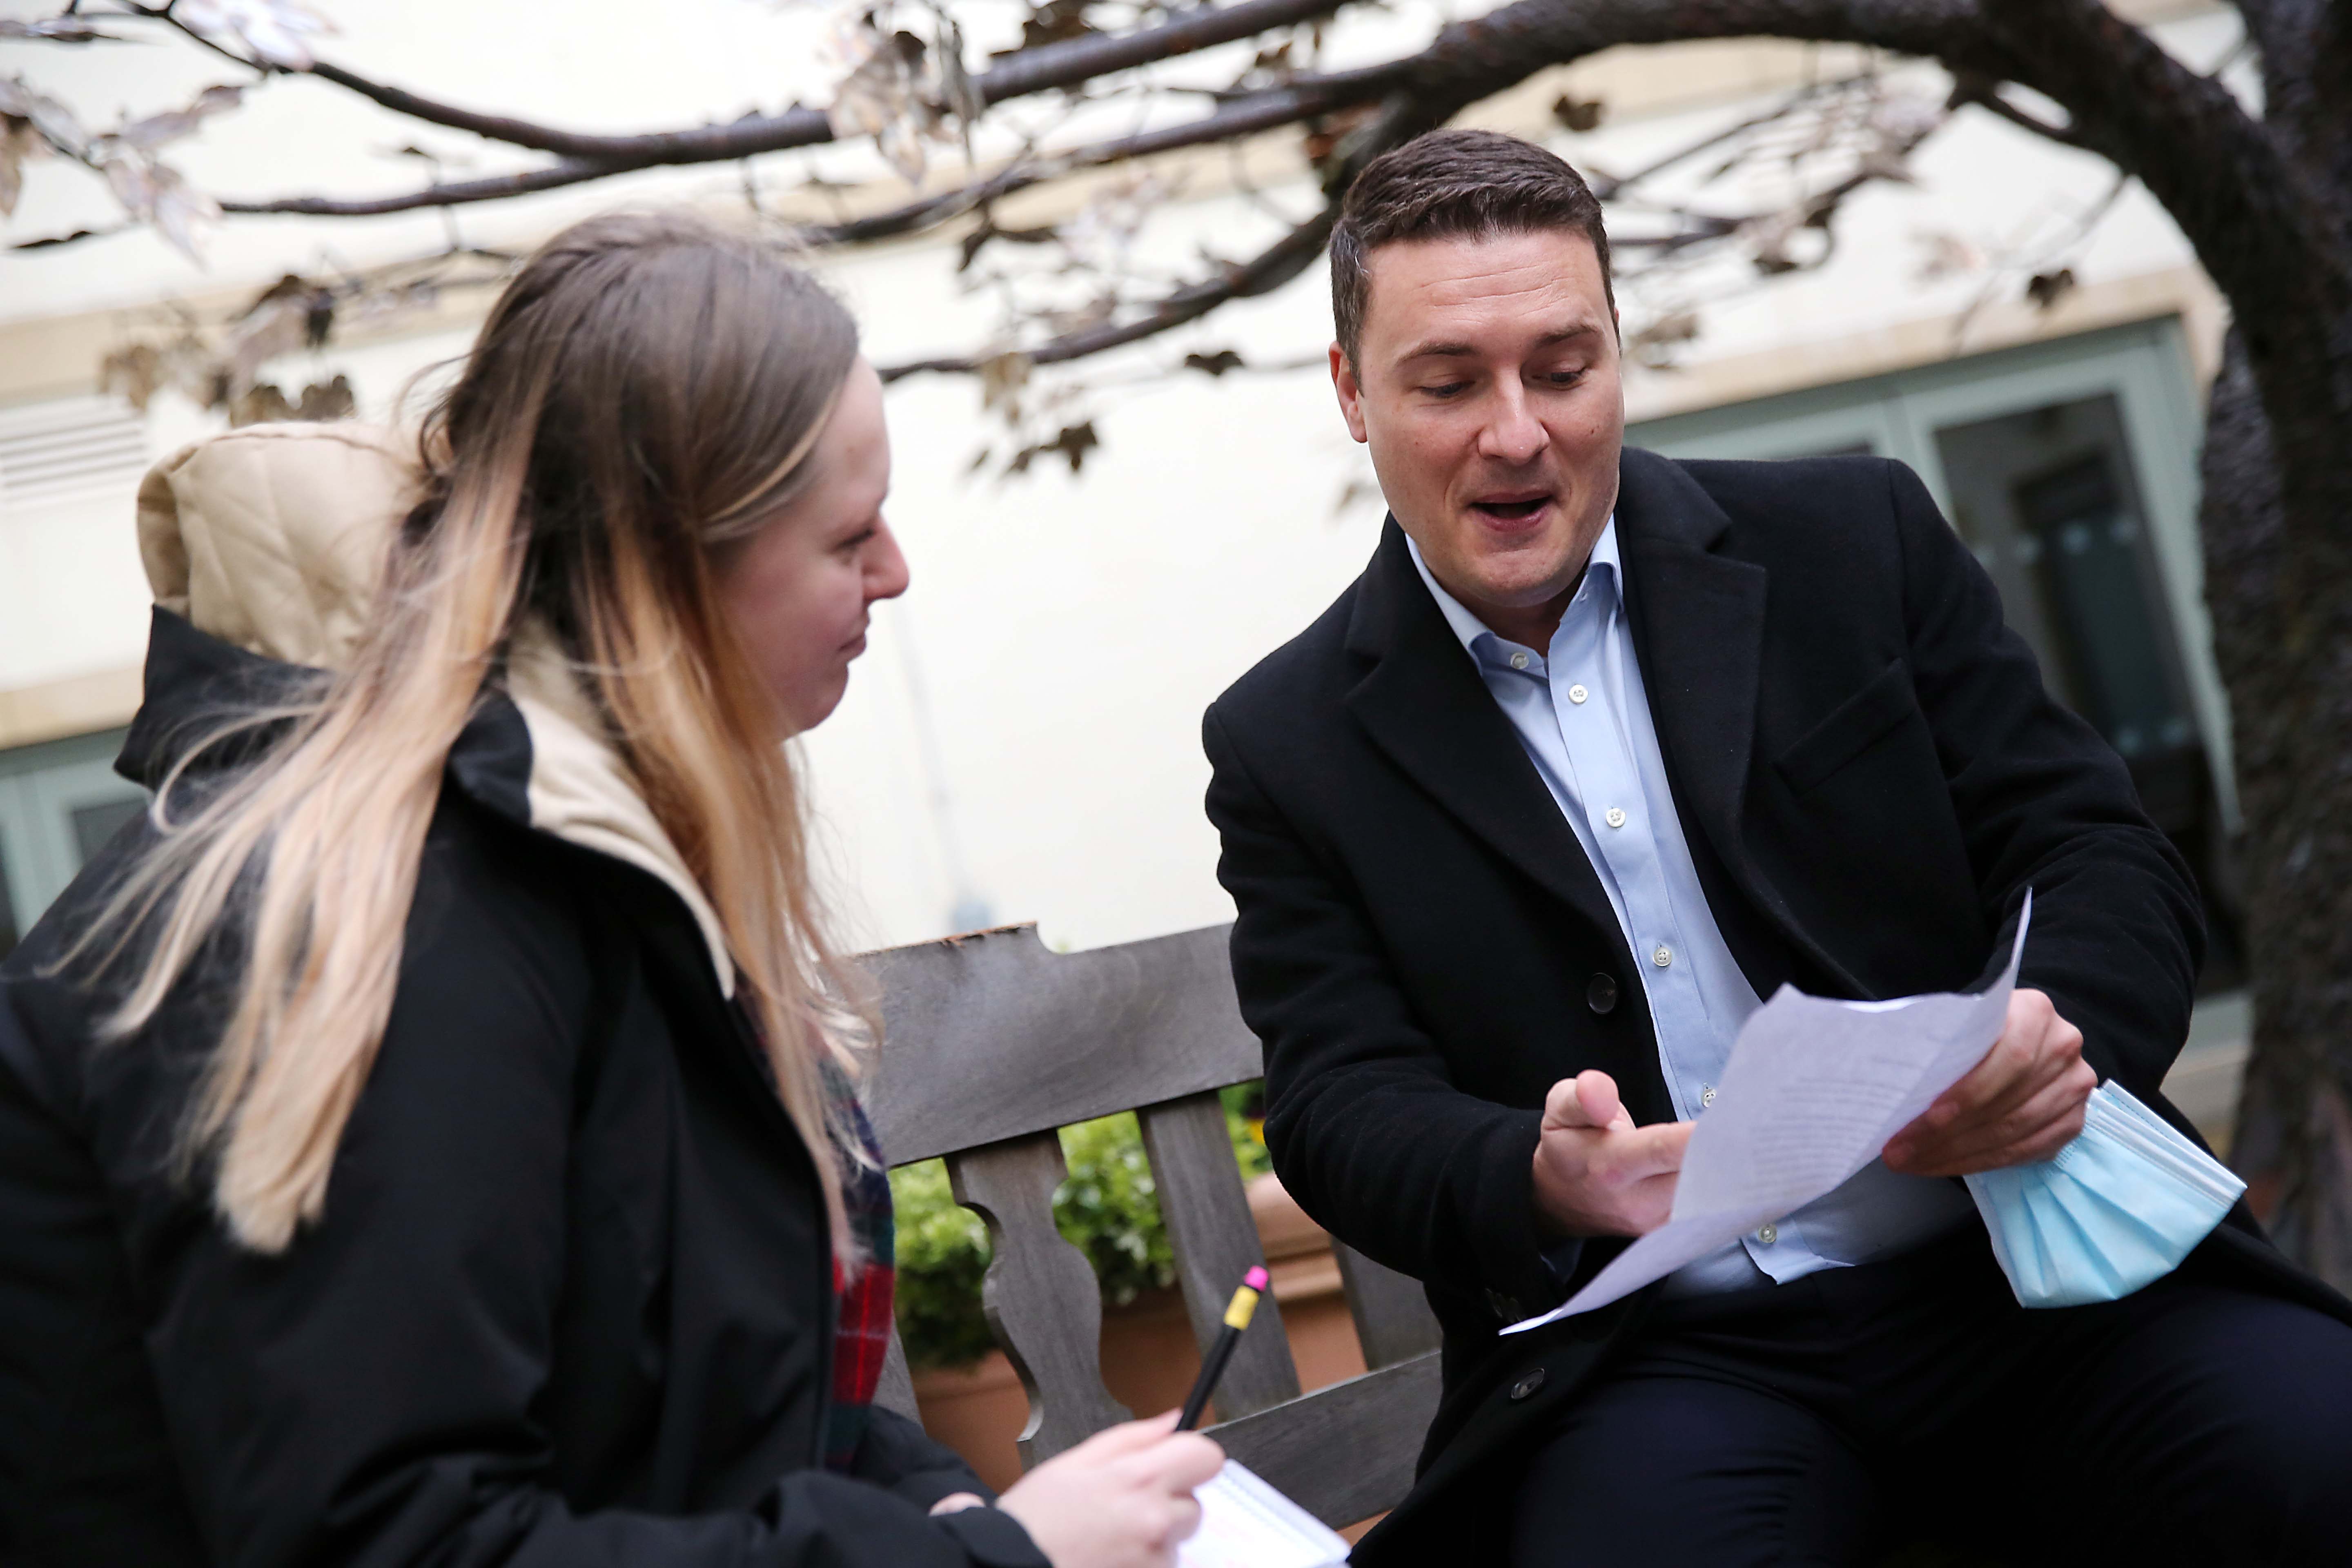 Kayleigh interviewing Wes Streeting MP